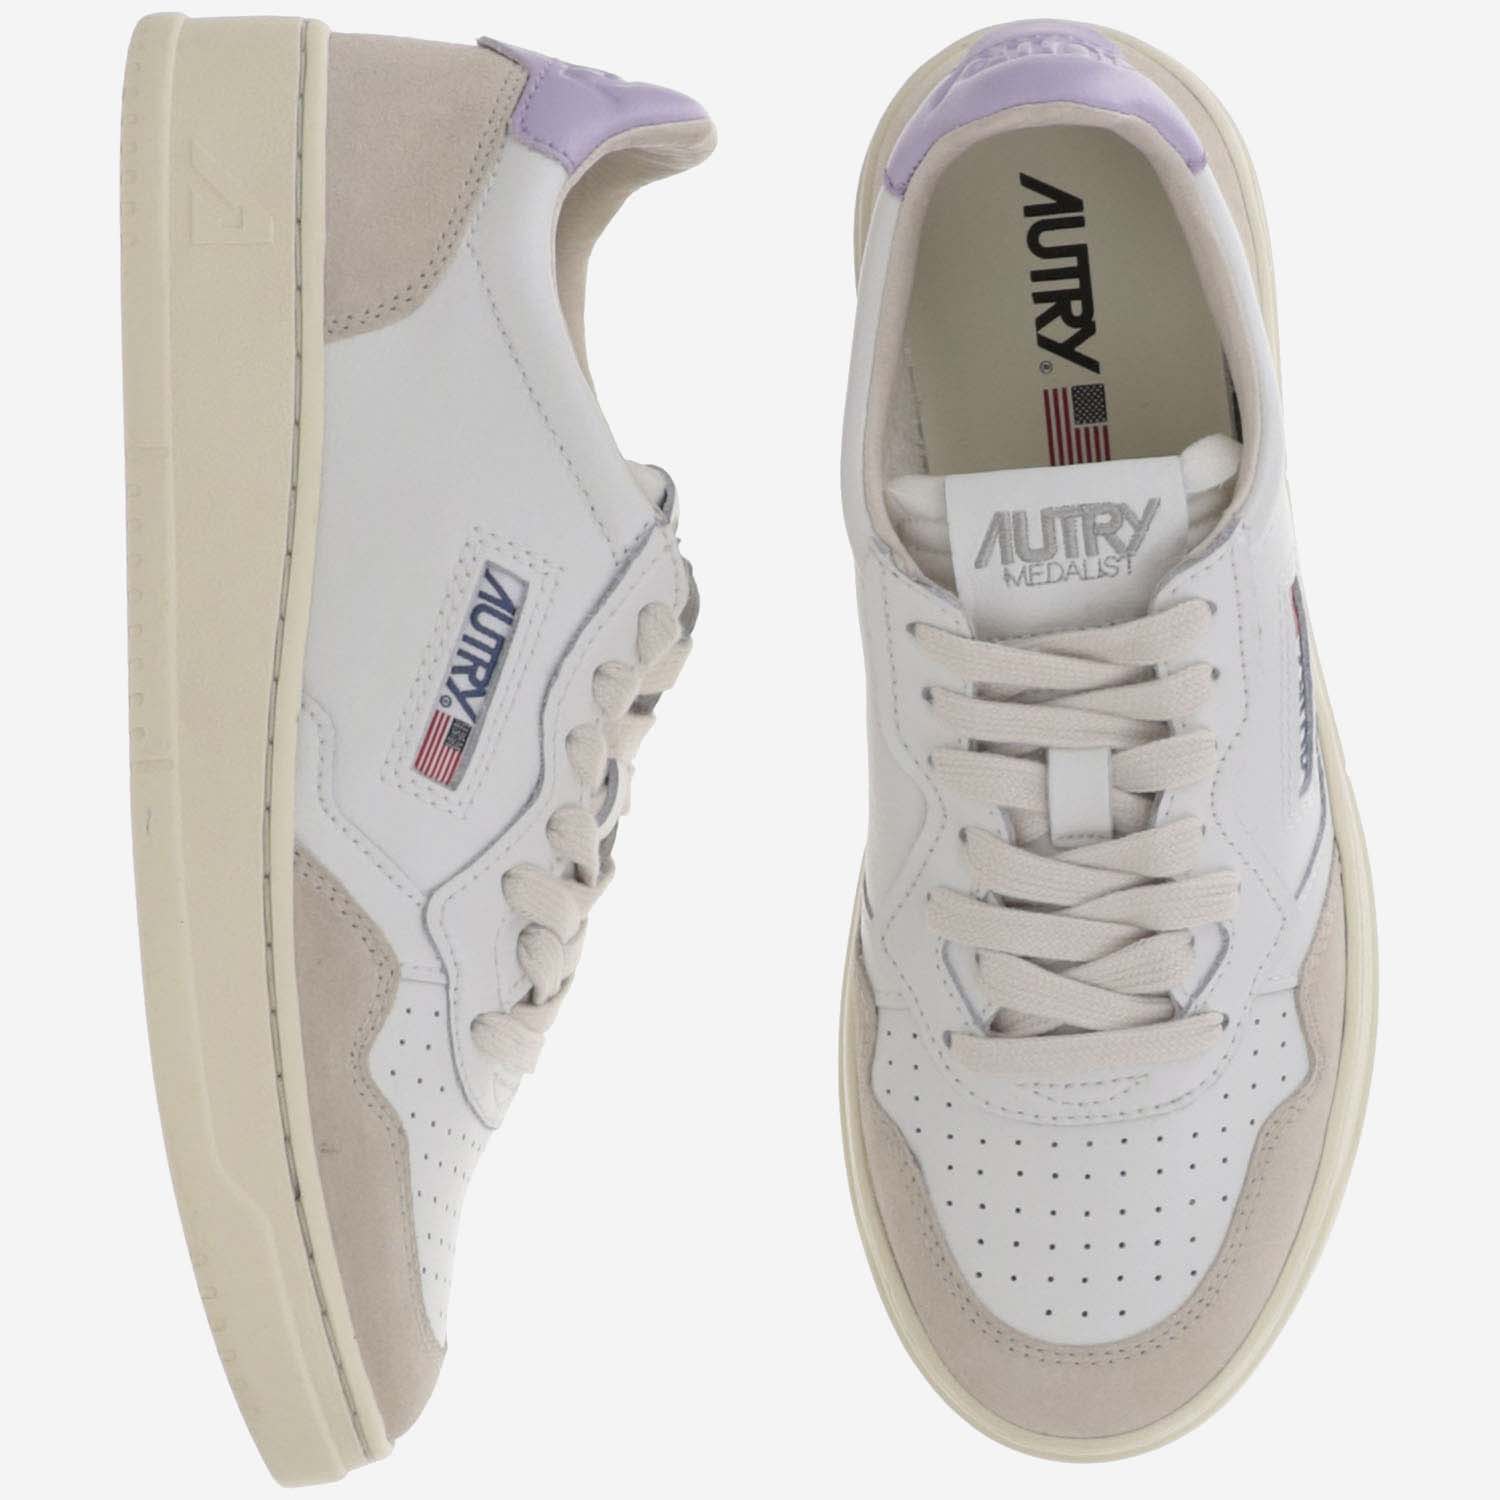 Autry Medalist Low Sneakers In Wht/pslilac